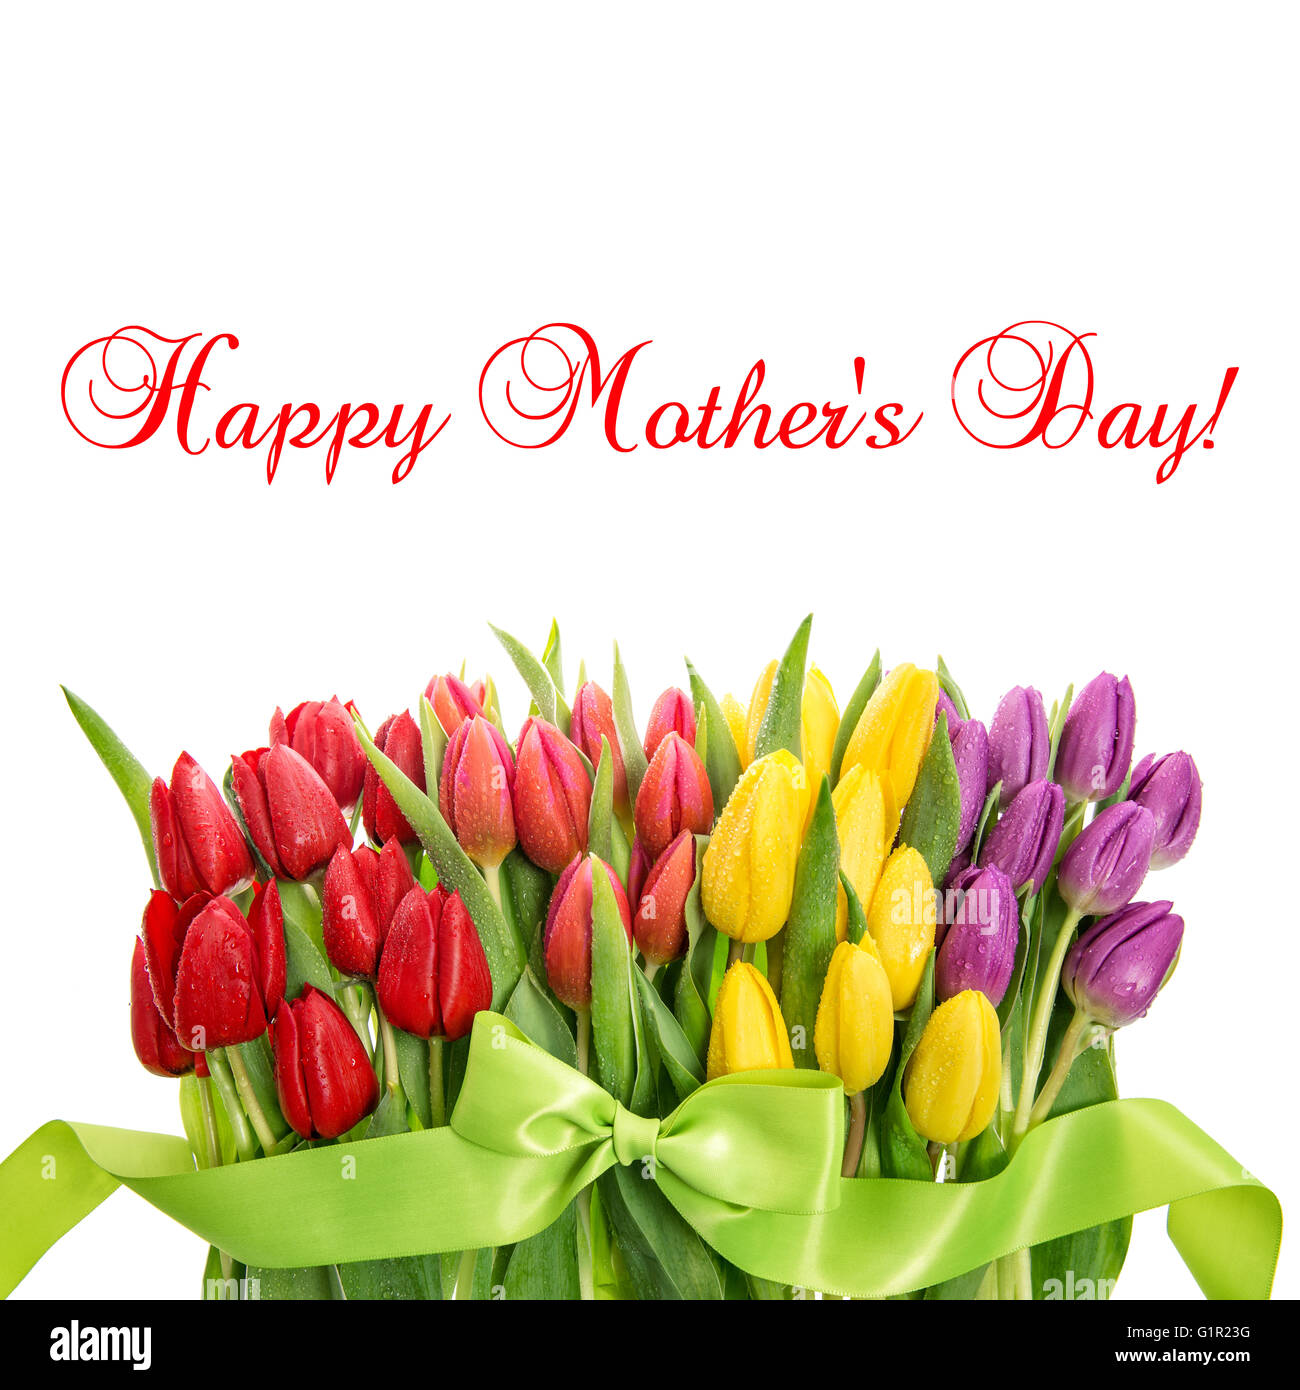 Tulips with water drops. Spring flowers red, pink, yellow, purple. Sample text Happy Mother’s Day! Stock Photo